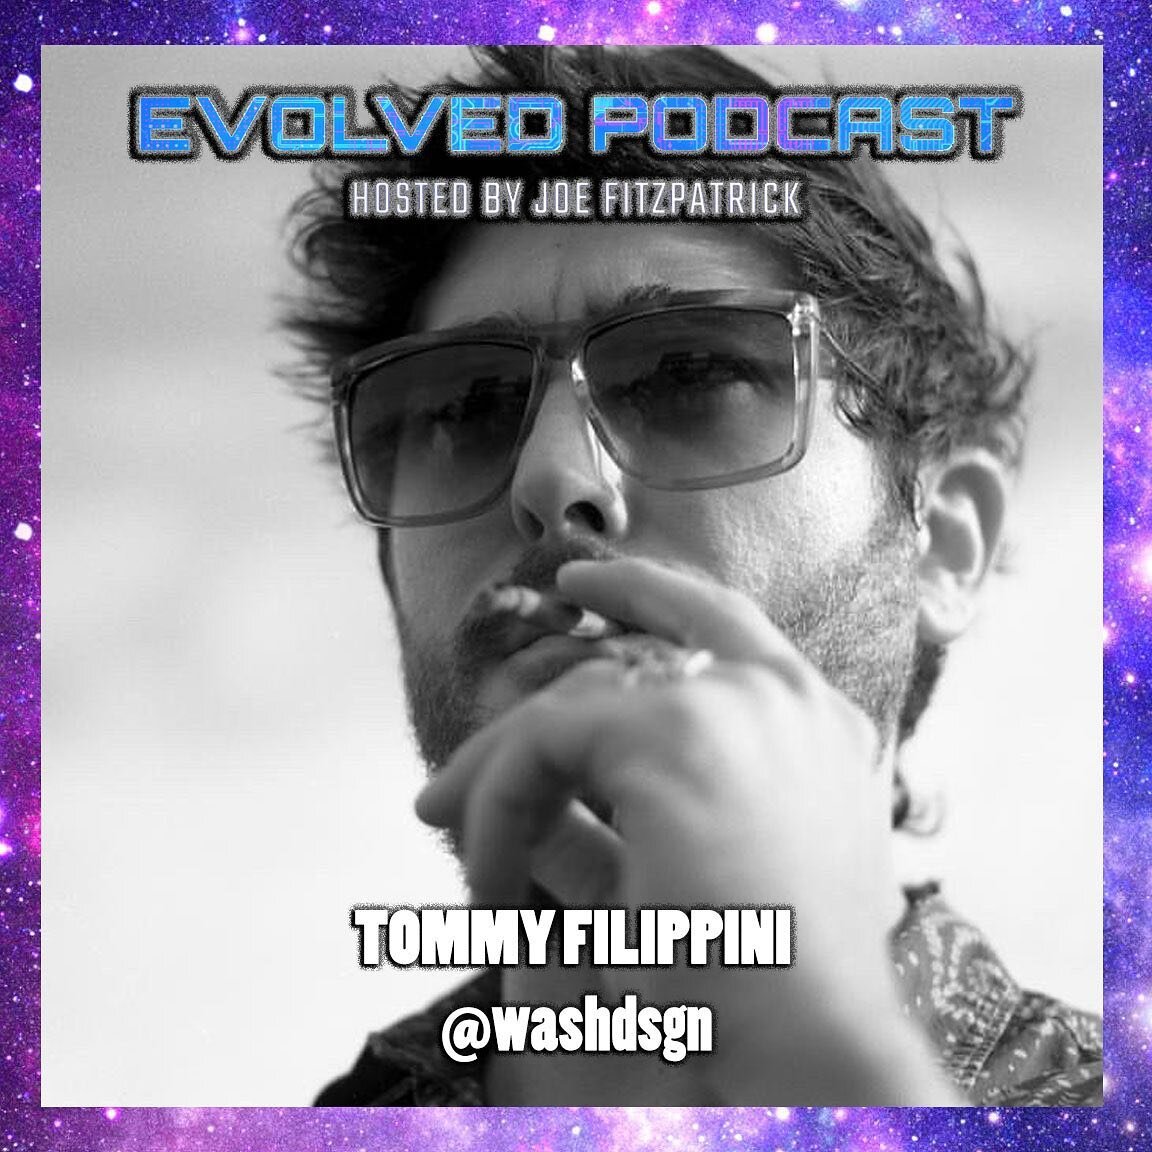 KNOW YOUR OWN SPEED: TOMMY FILIPPINI @washdsgn TALKS JEWELRY DESIGN AND SUSTAINABILITY | EP. 013

From a young age, Tommy has explored his creativity through craft and is on a &ldquo;forever journey&rdquo; to further develop it. In high school, Tommy